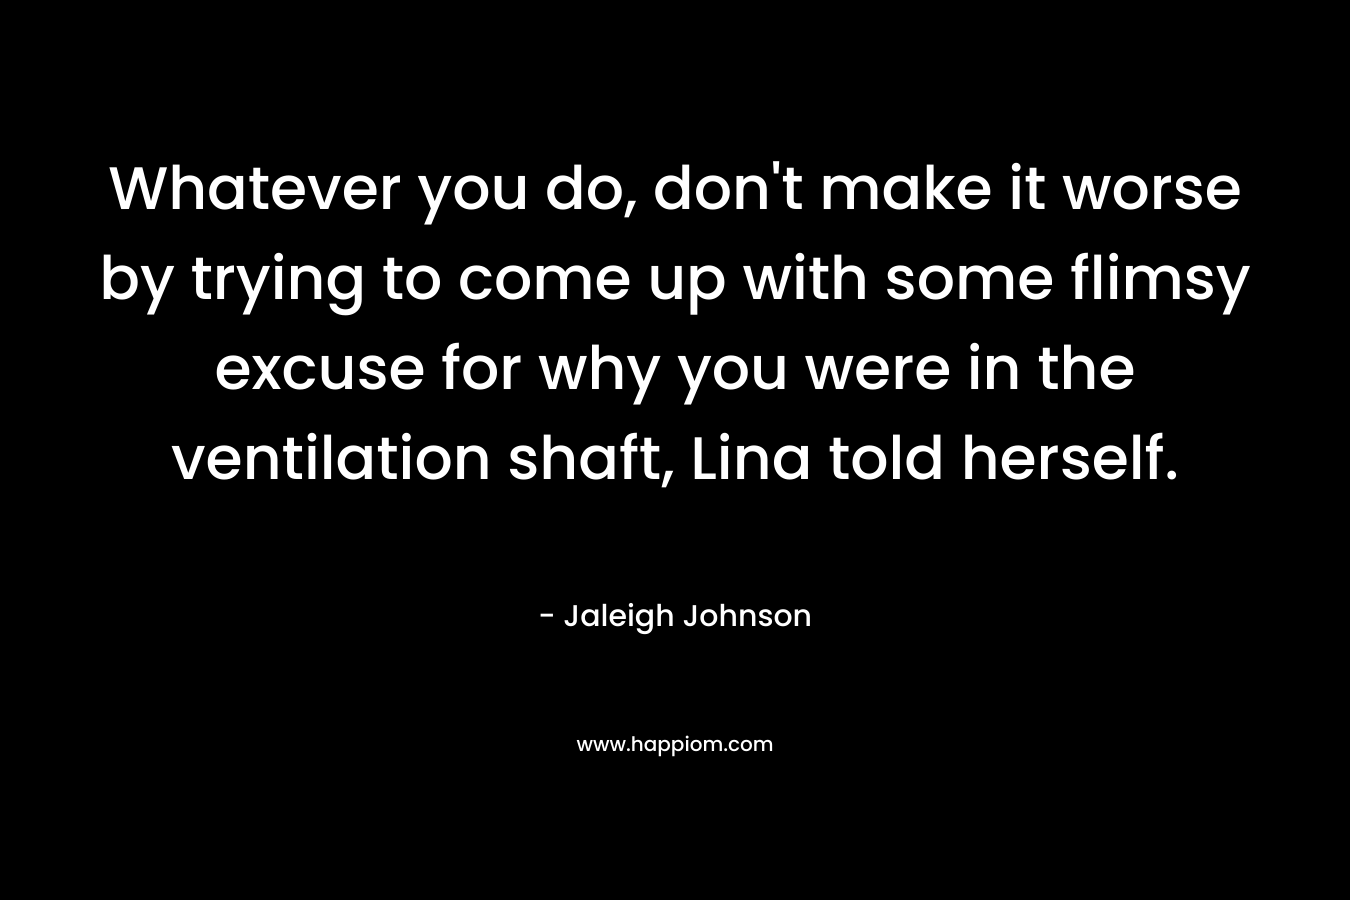 Whatever you do, don’t make it worse by trying to come up with some flimsy excuse for why you were in the ventilation shaft, Lina told herself. – Jaleigh Johnson